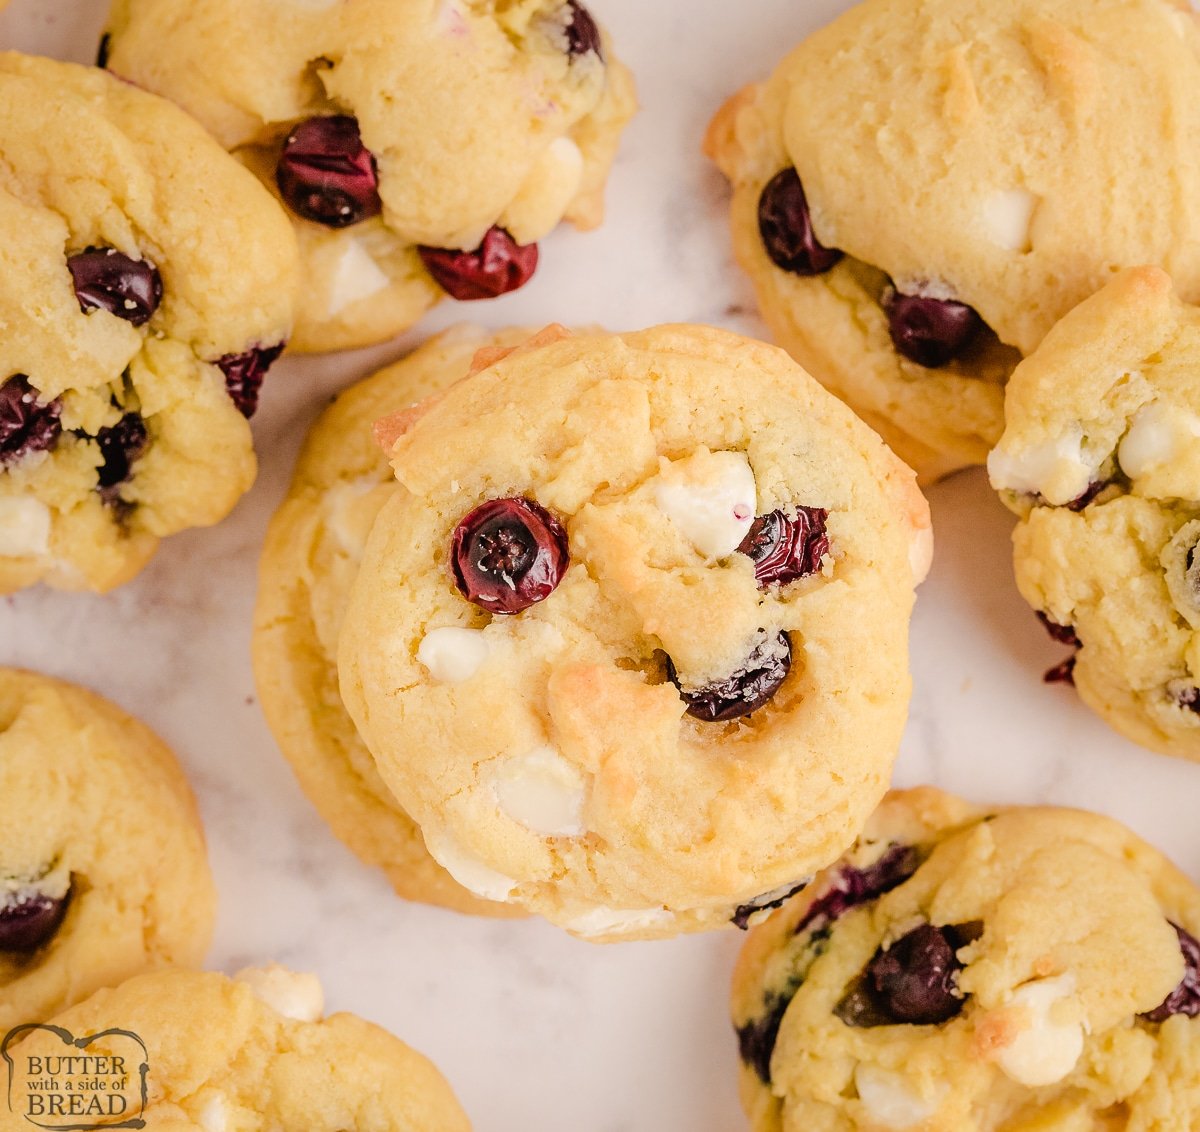 Blueberry Cream Cookies with white chocolate chips